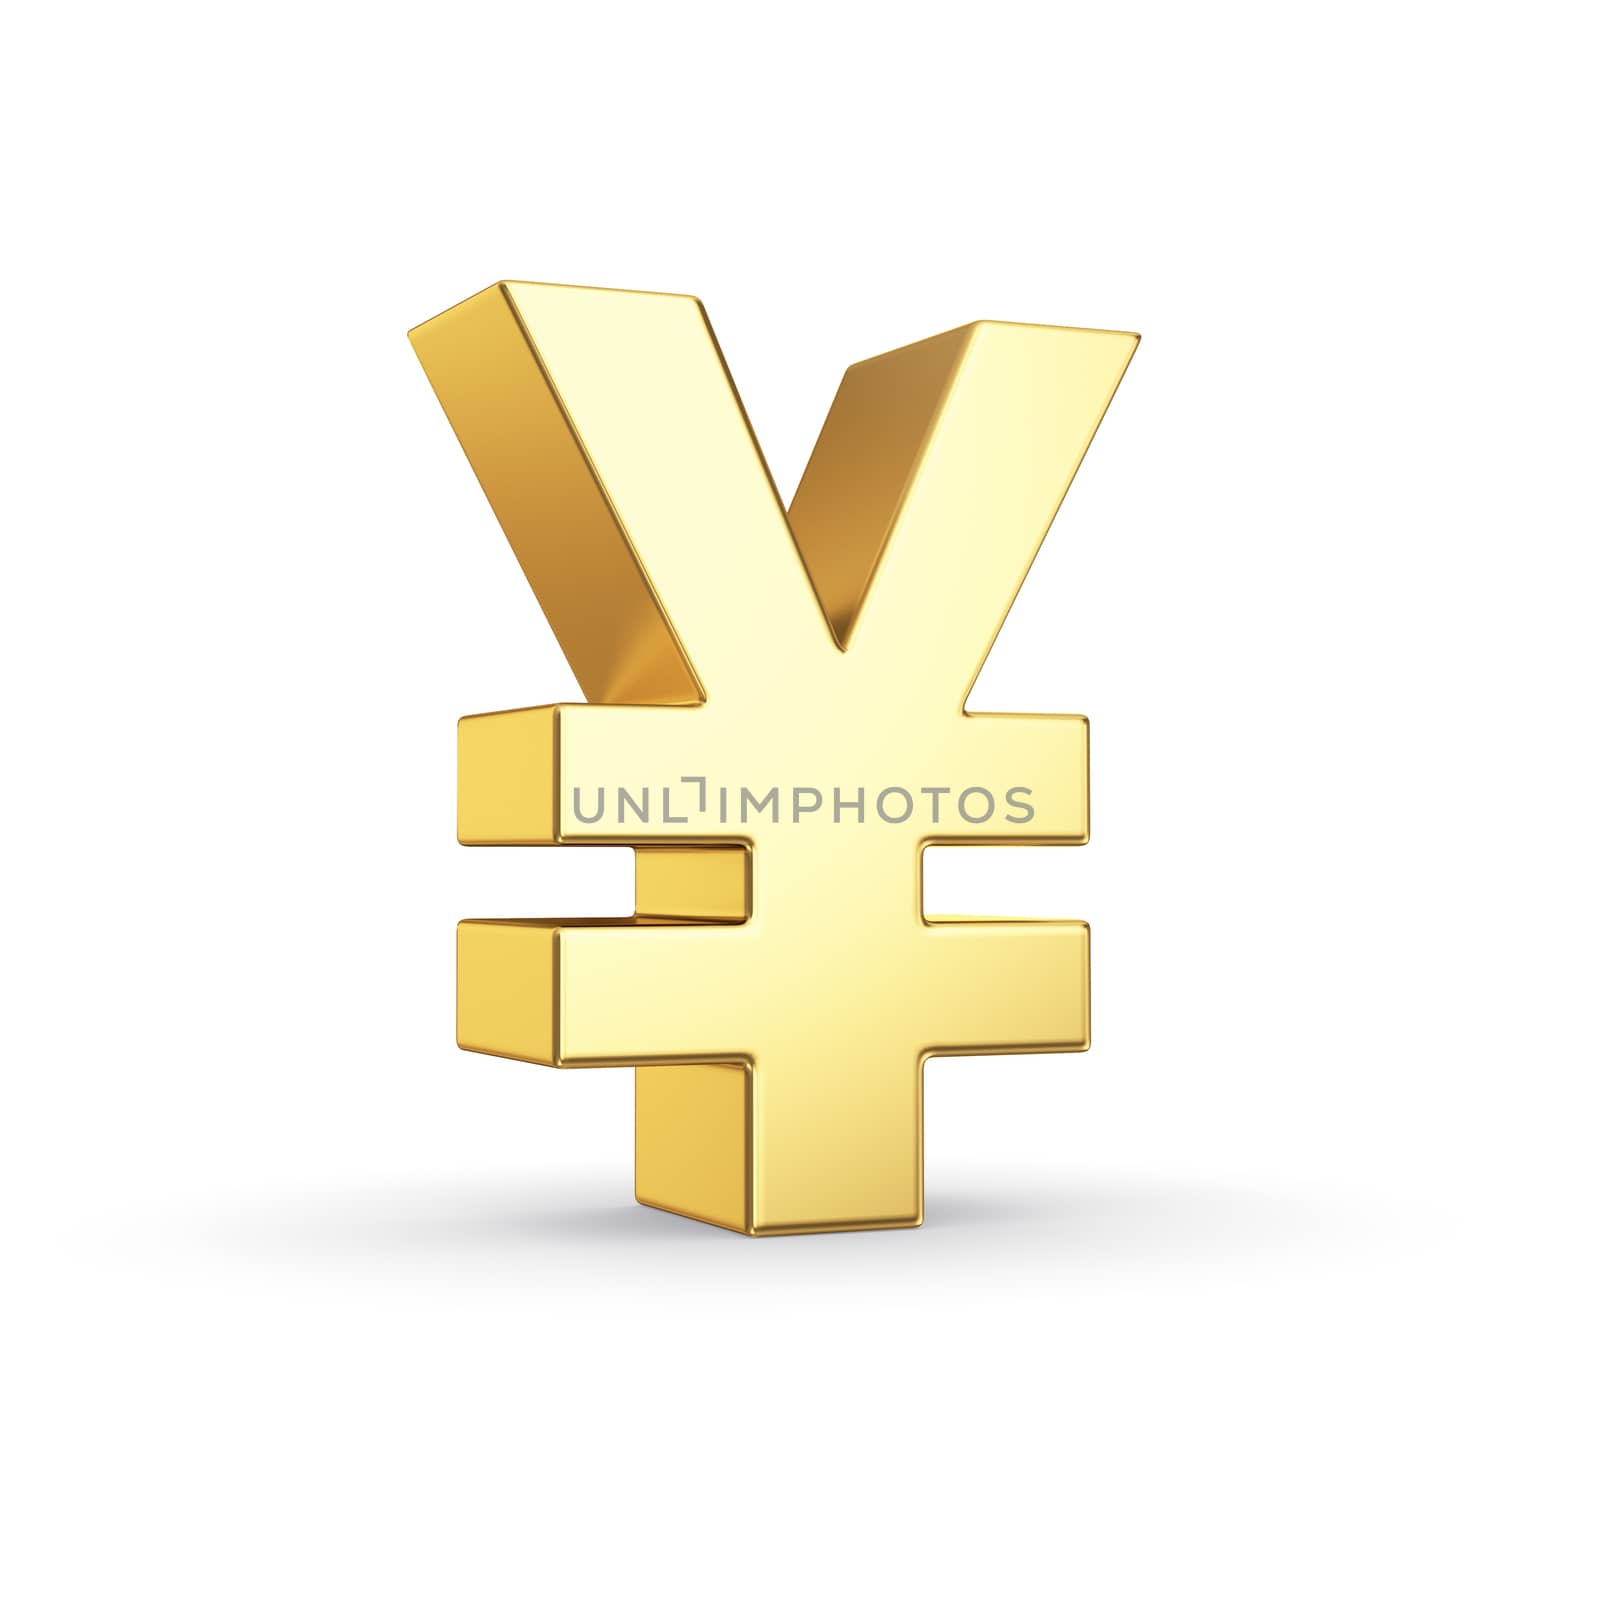 Golden yen currency symbol - clipping path by 123dartist